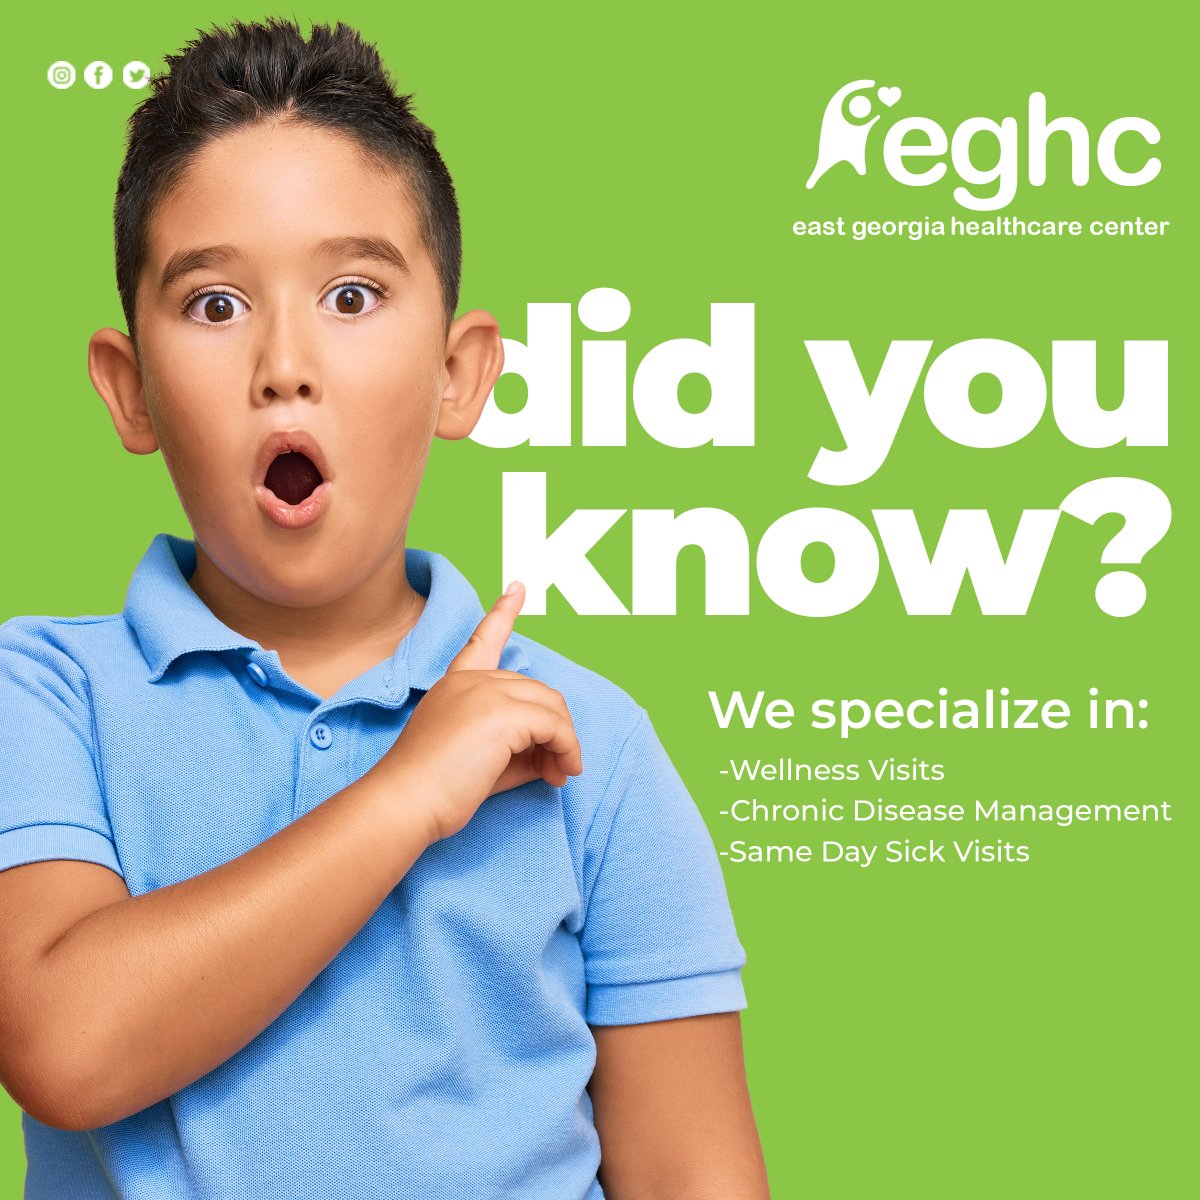 #EGHC specializes in wellness visits, chronic disease management, and same day sick visits from newborn to teens. Other services that we provide include sports physicals, immunizations, behavioral healthcare, and family planning. 

#EastGeorgiaHealthCare #EGHC #PediatricMedicine